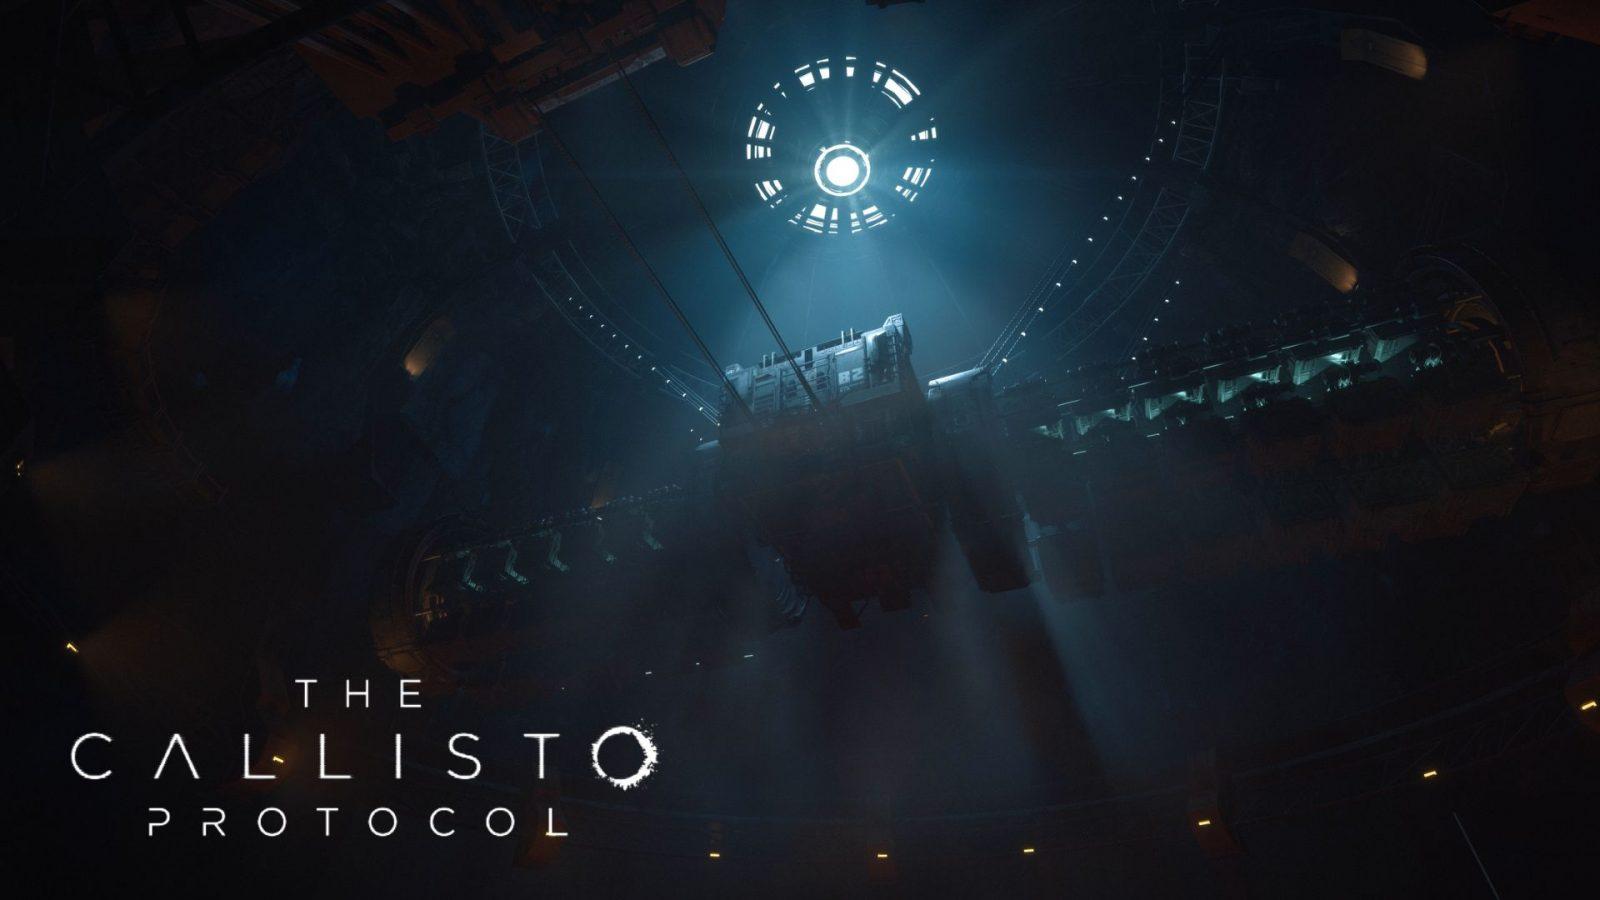 The Callisto Protocol' Gets PC Patch After Being Buried In Angry